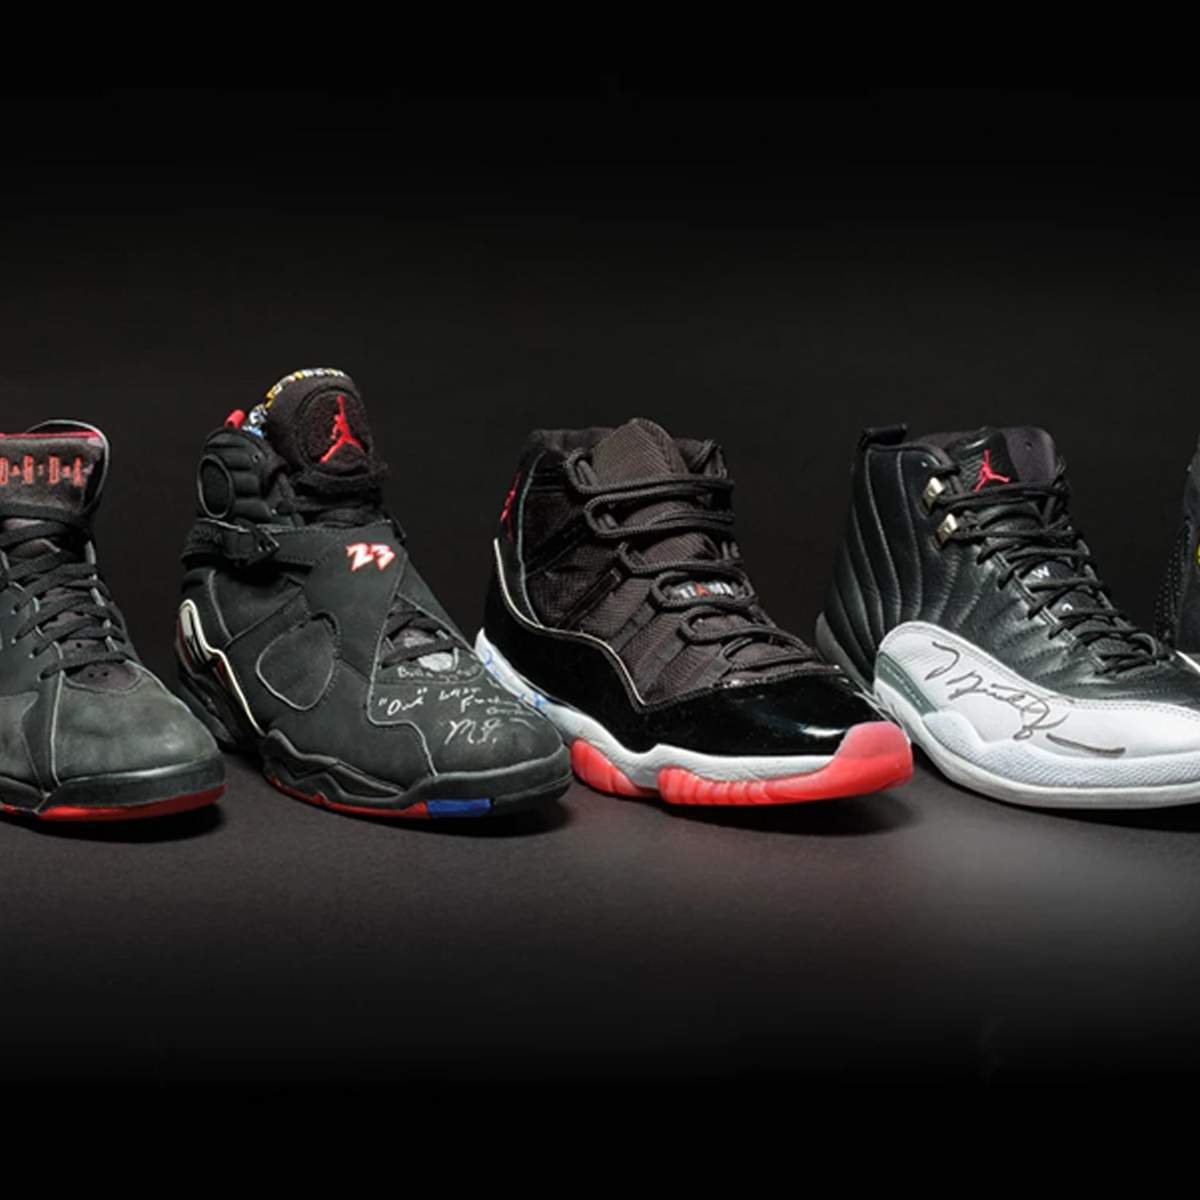 Michael Jordan Dunks on the Competition with Bulls-Inspired Puma Sneaker Collection and Bold Vision for Jordan Brand